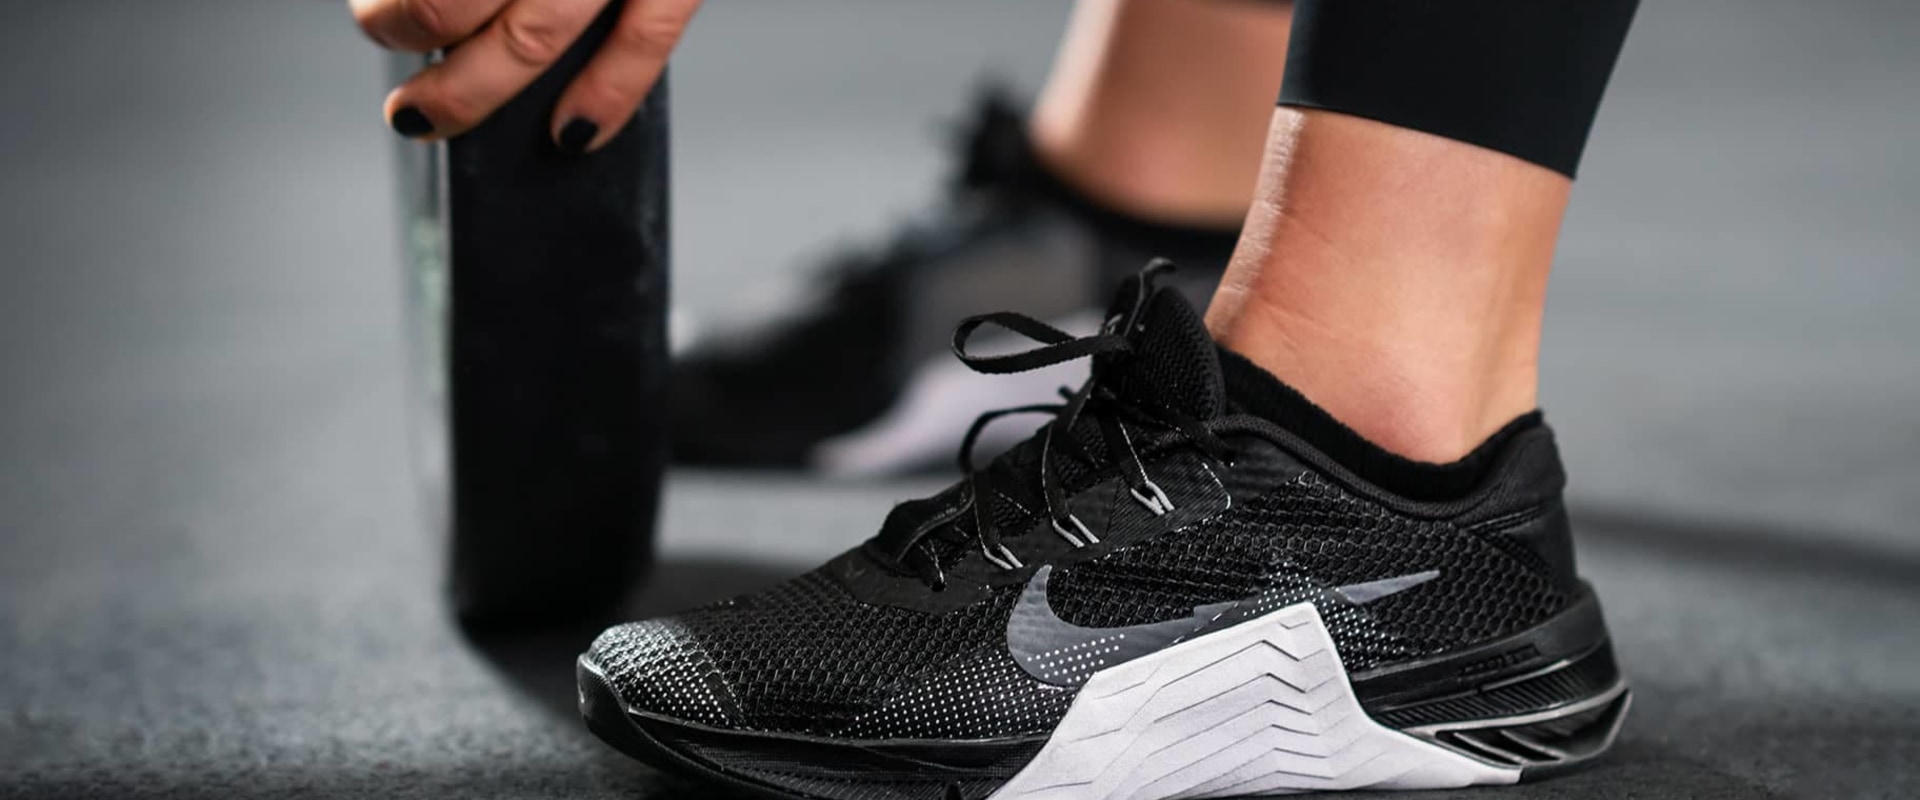 Everything You Need to Know About Shoes for CrossFit Workouts